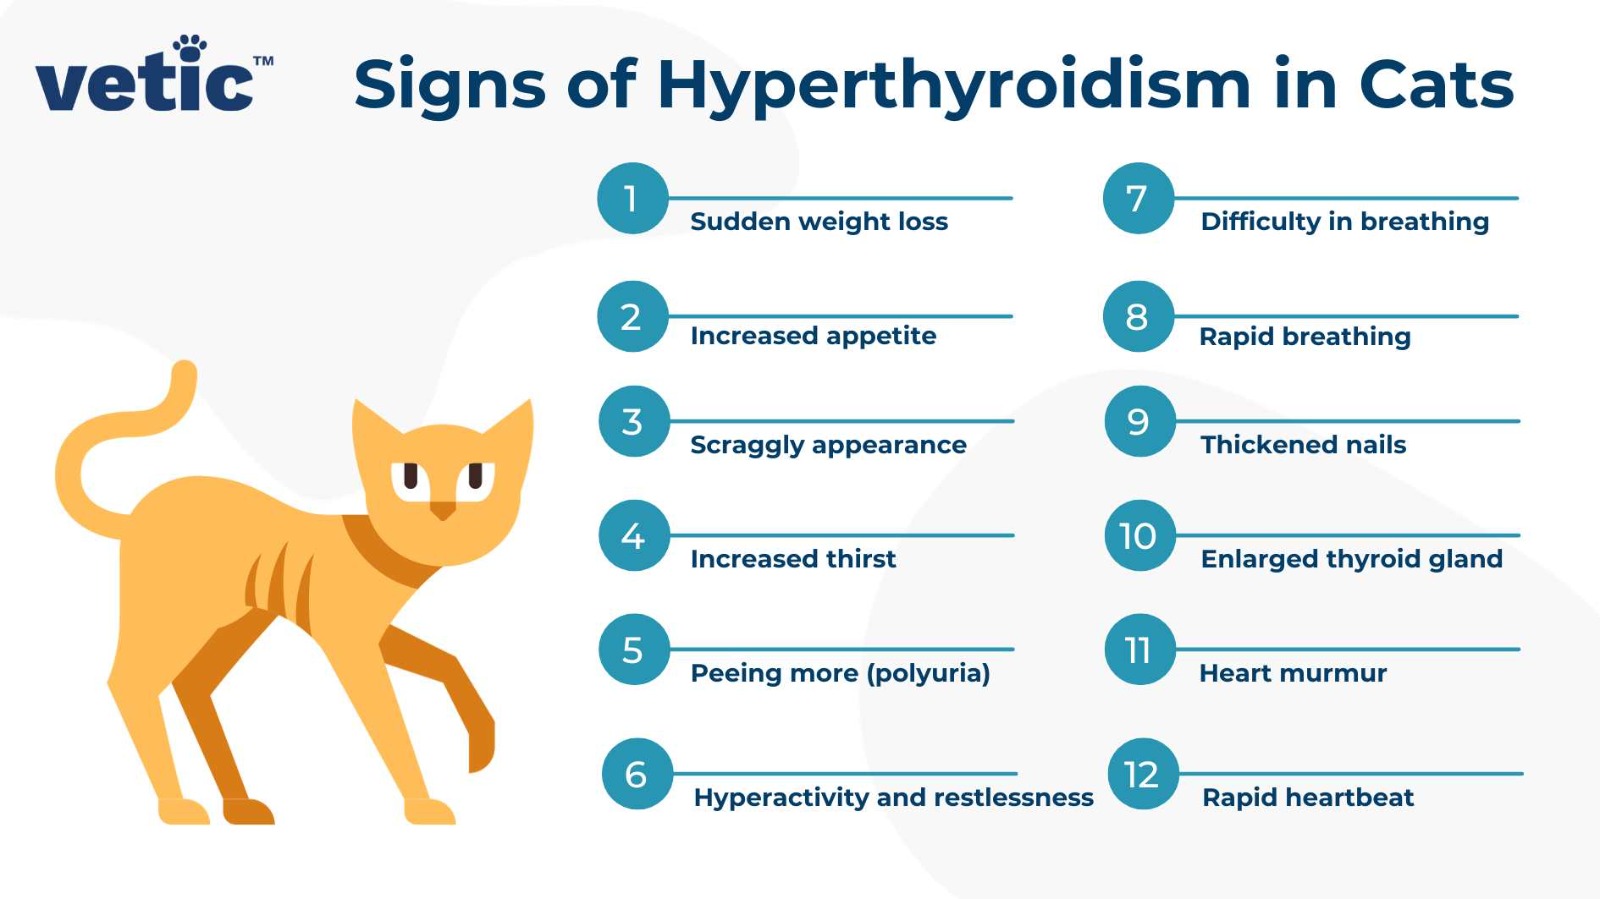 Infographic on Signs of Hyperthyroidism in Cats. It includes all 12 signs - Sudden weight loss Increased appetite Scraggly appearance Increased thirst Peeing more than usual (polyuria) Hyperactivity and restlessness Difficulty in breathing Rapid breathing Thickened nails Enlarged thyroid gland Heart murmur Rapid heartbeat